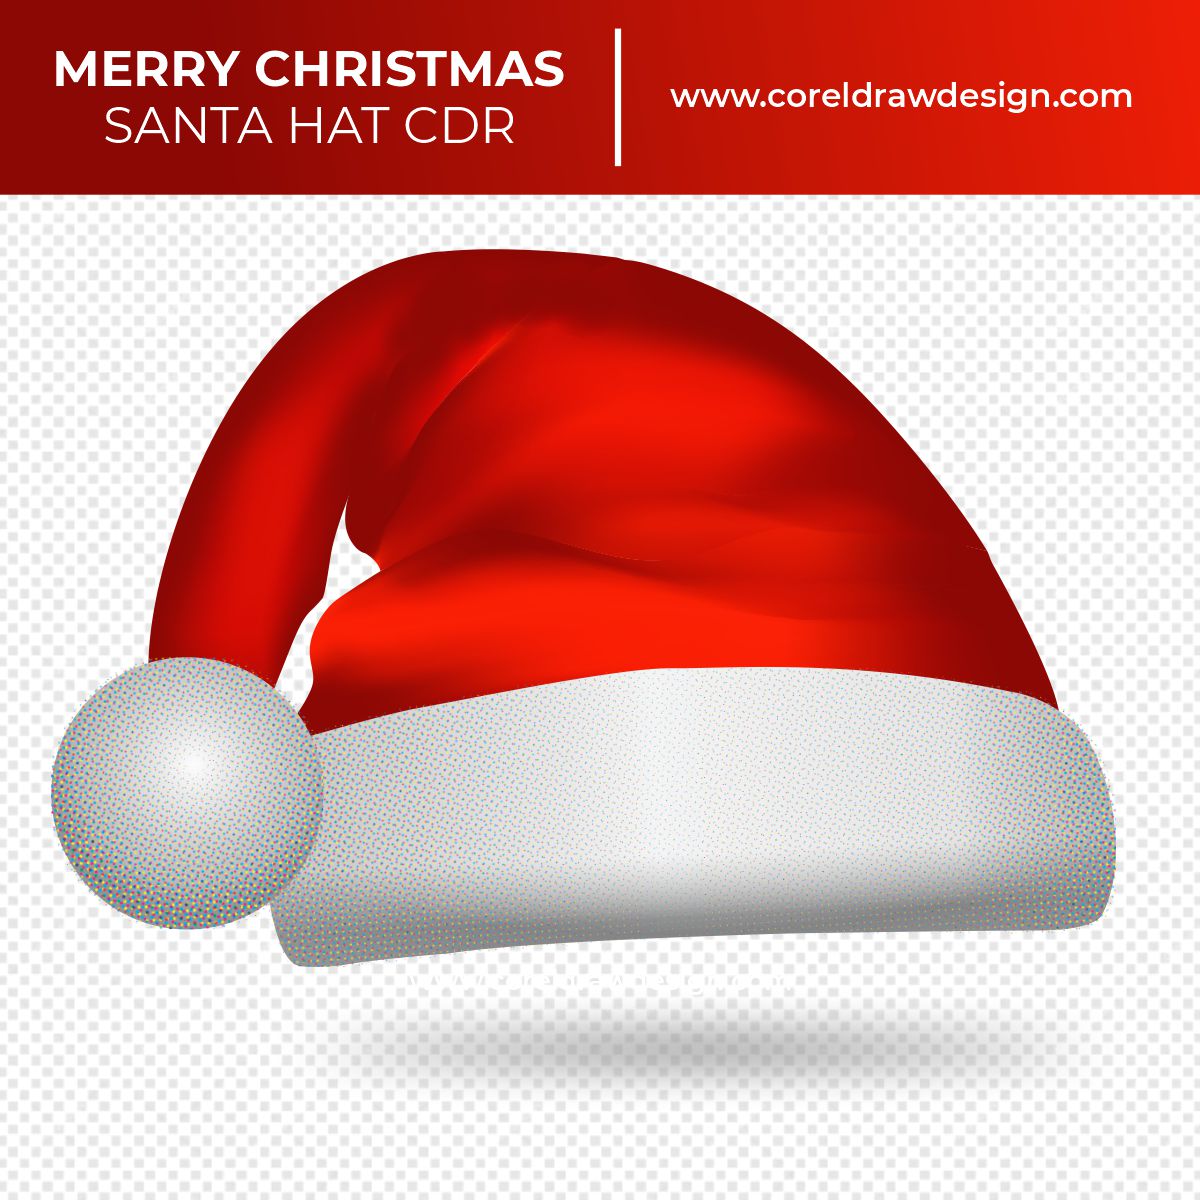 Merry Christmas Santa Claus Hat Cdr Free Vector